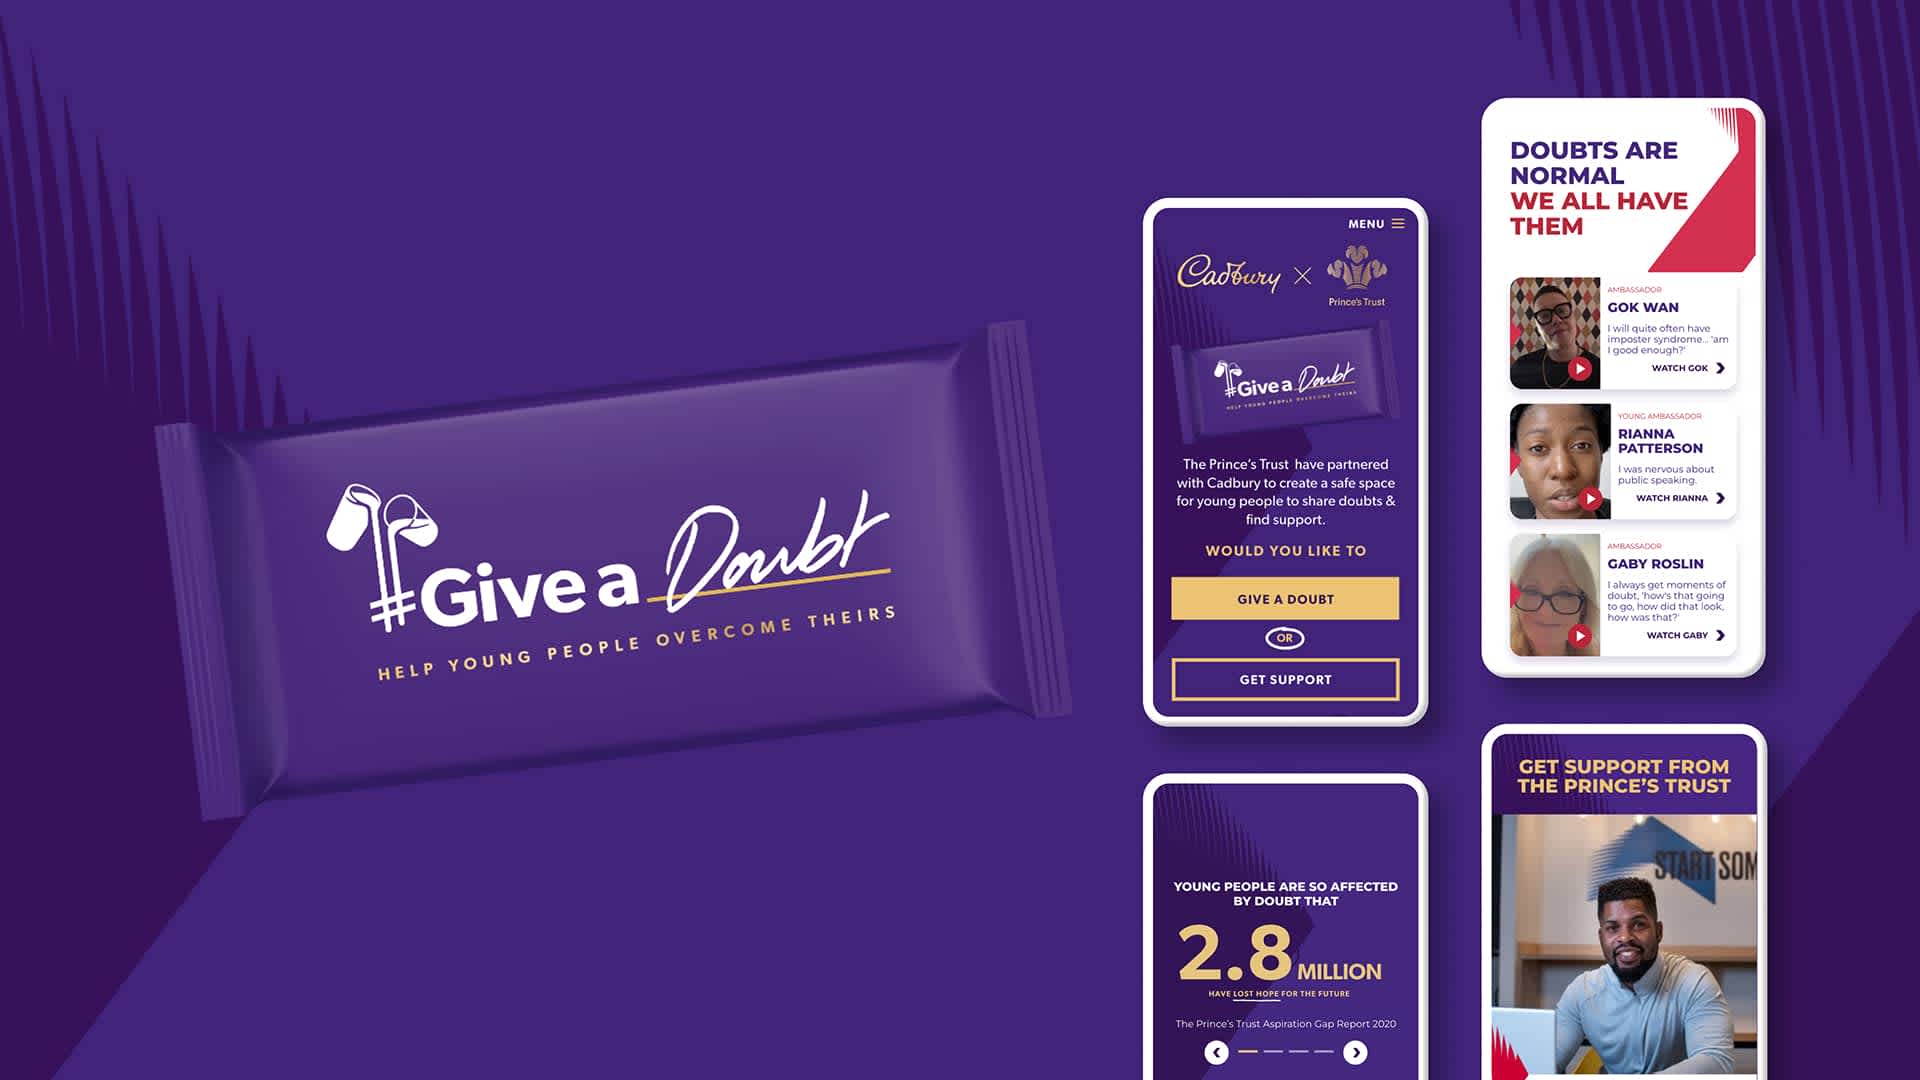 Image of several phones with Cadbury chocolate bars featuring the slogan #Give a Doubt.